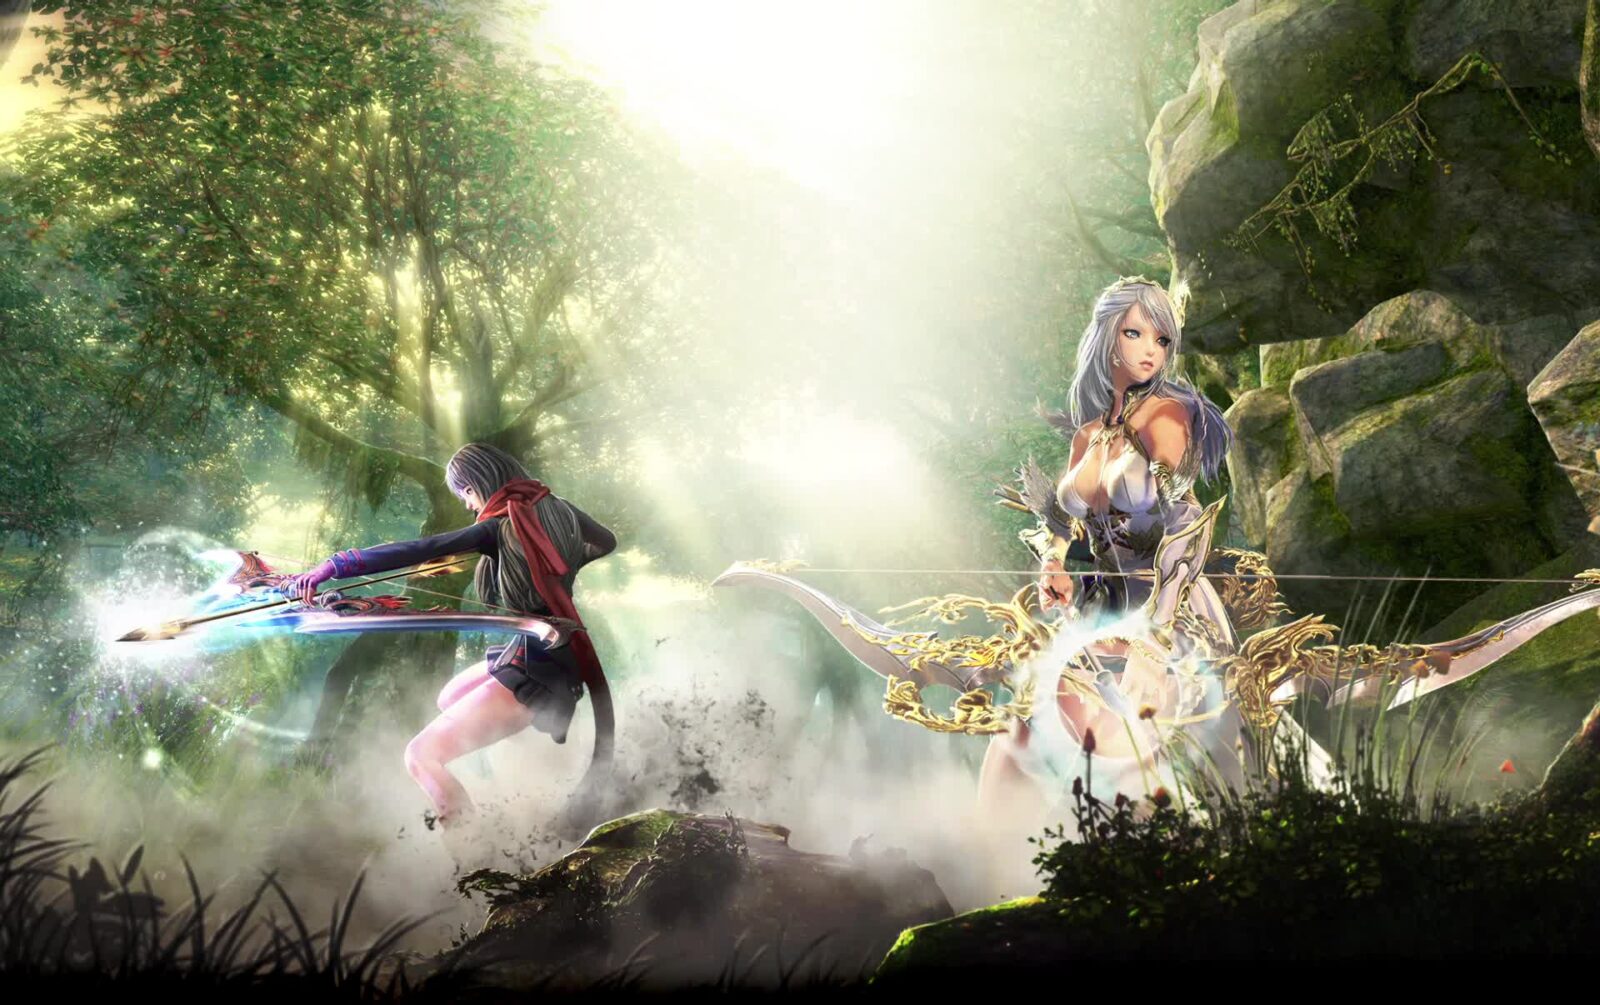 LiveWallpapers4Free.com | Storm of Arrows - Blade & Soul - Free Live Wallpaper